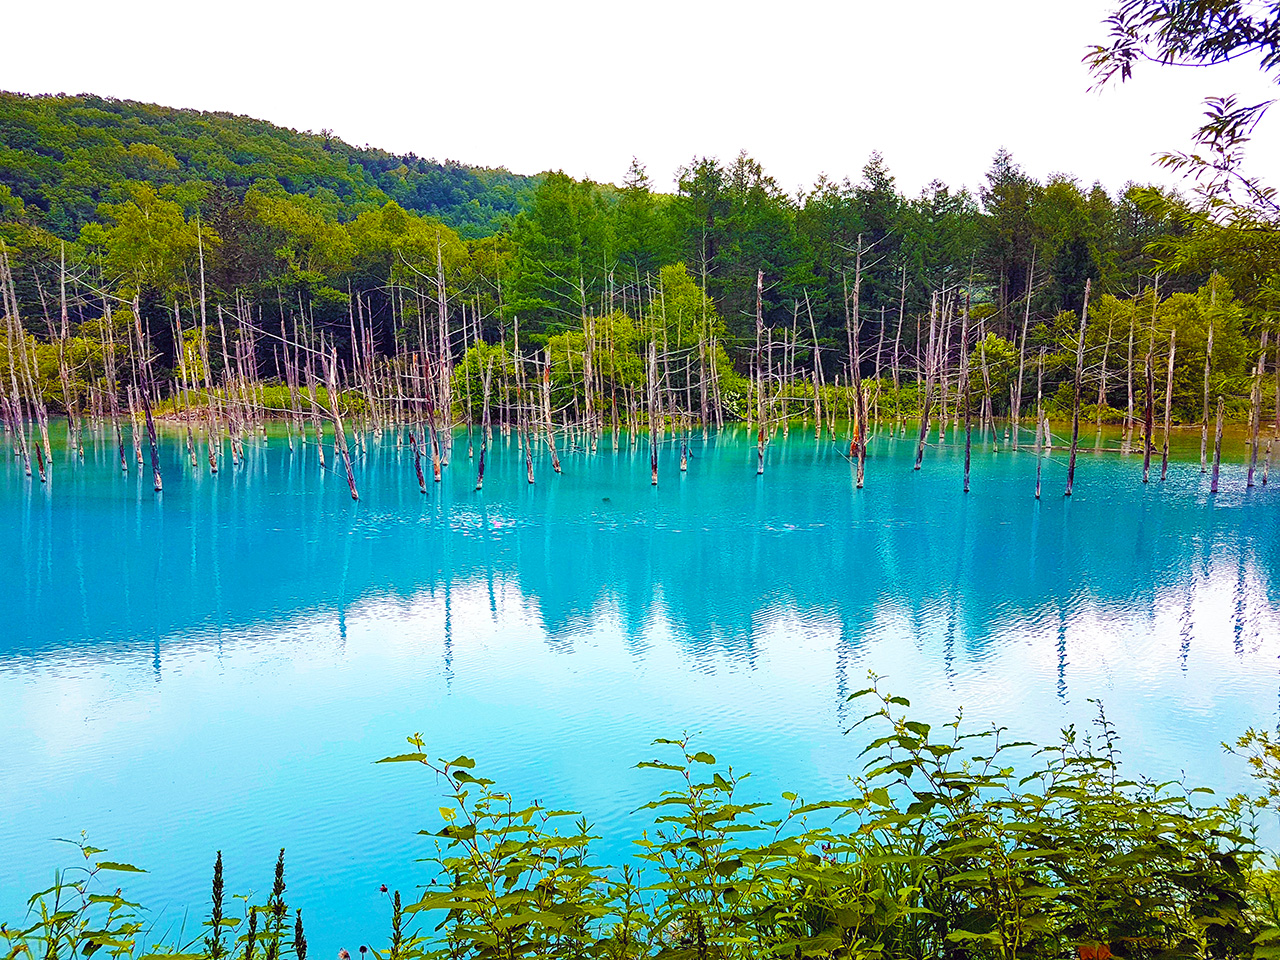 Overview of the Blue Pond in Biei, Hokkaido